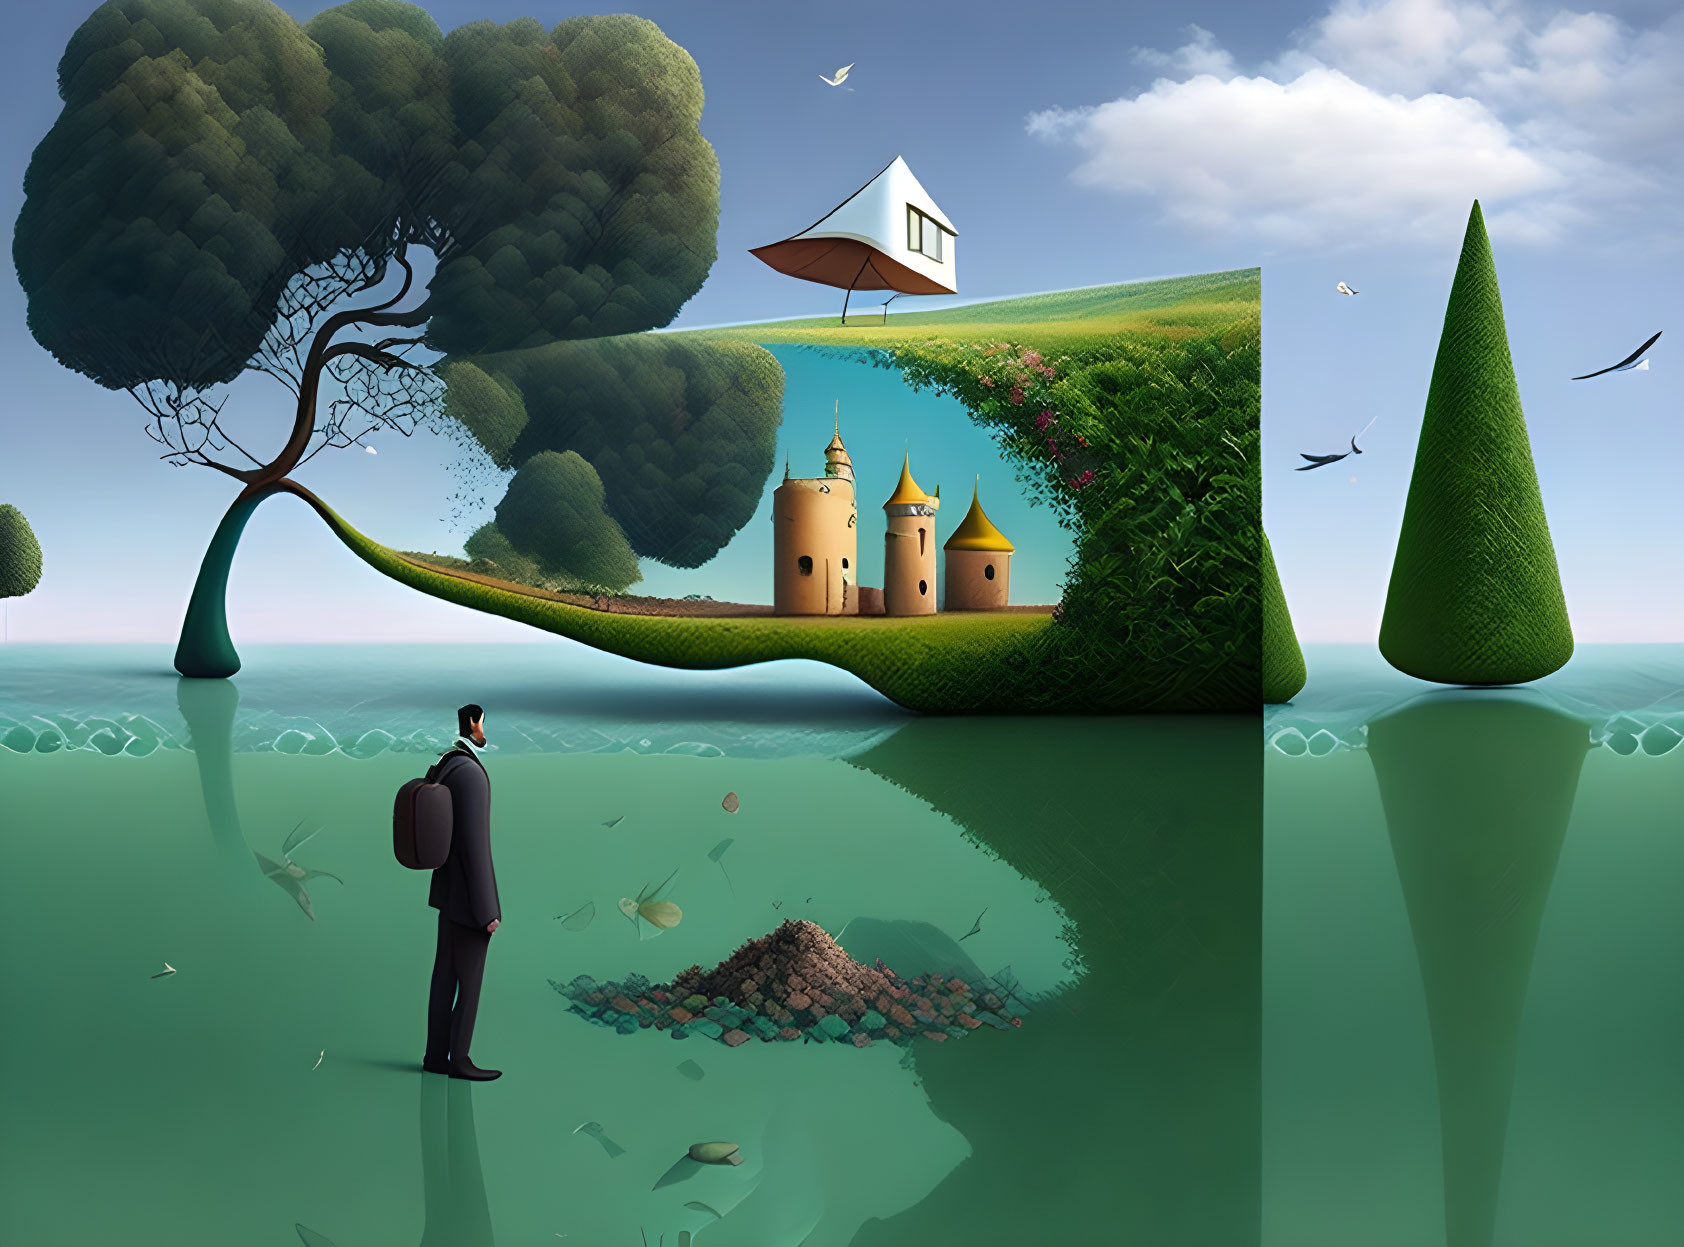 Man in suit in surreal landscape with rolling hills and floating house.